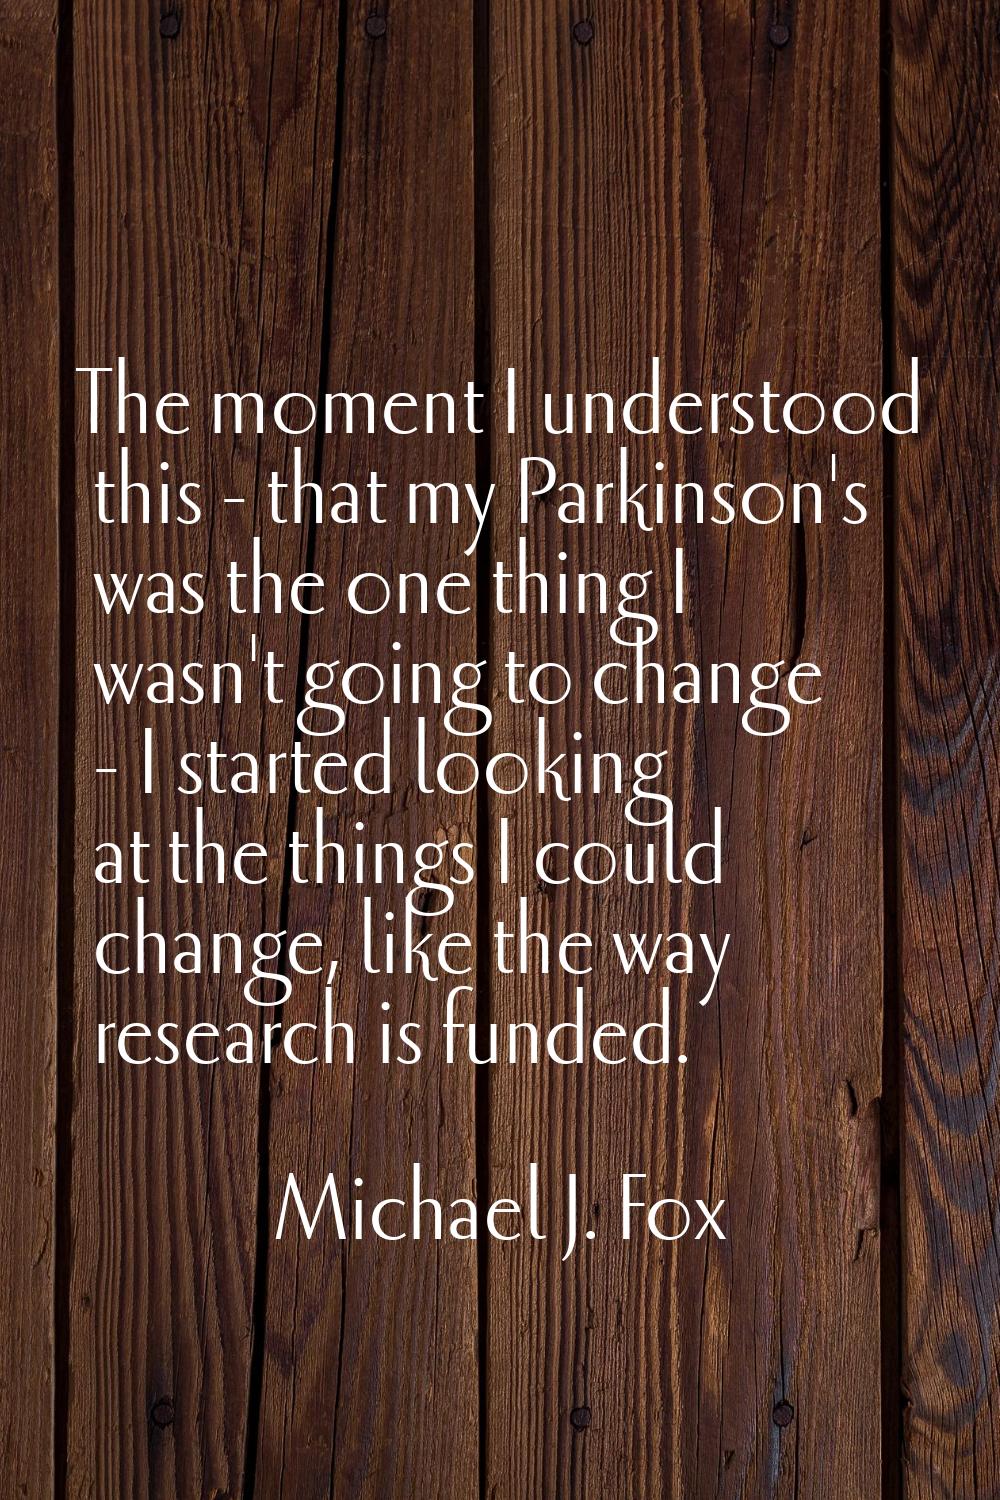 The moment I understood this - that my Parkinson's was the one thing I wasn't going to change - I s